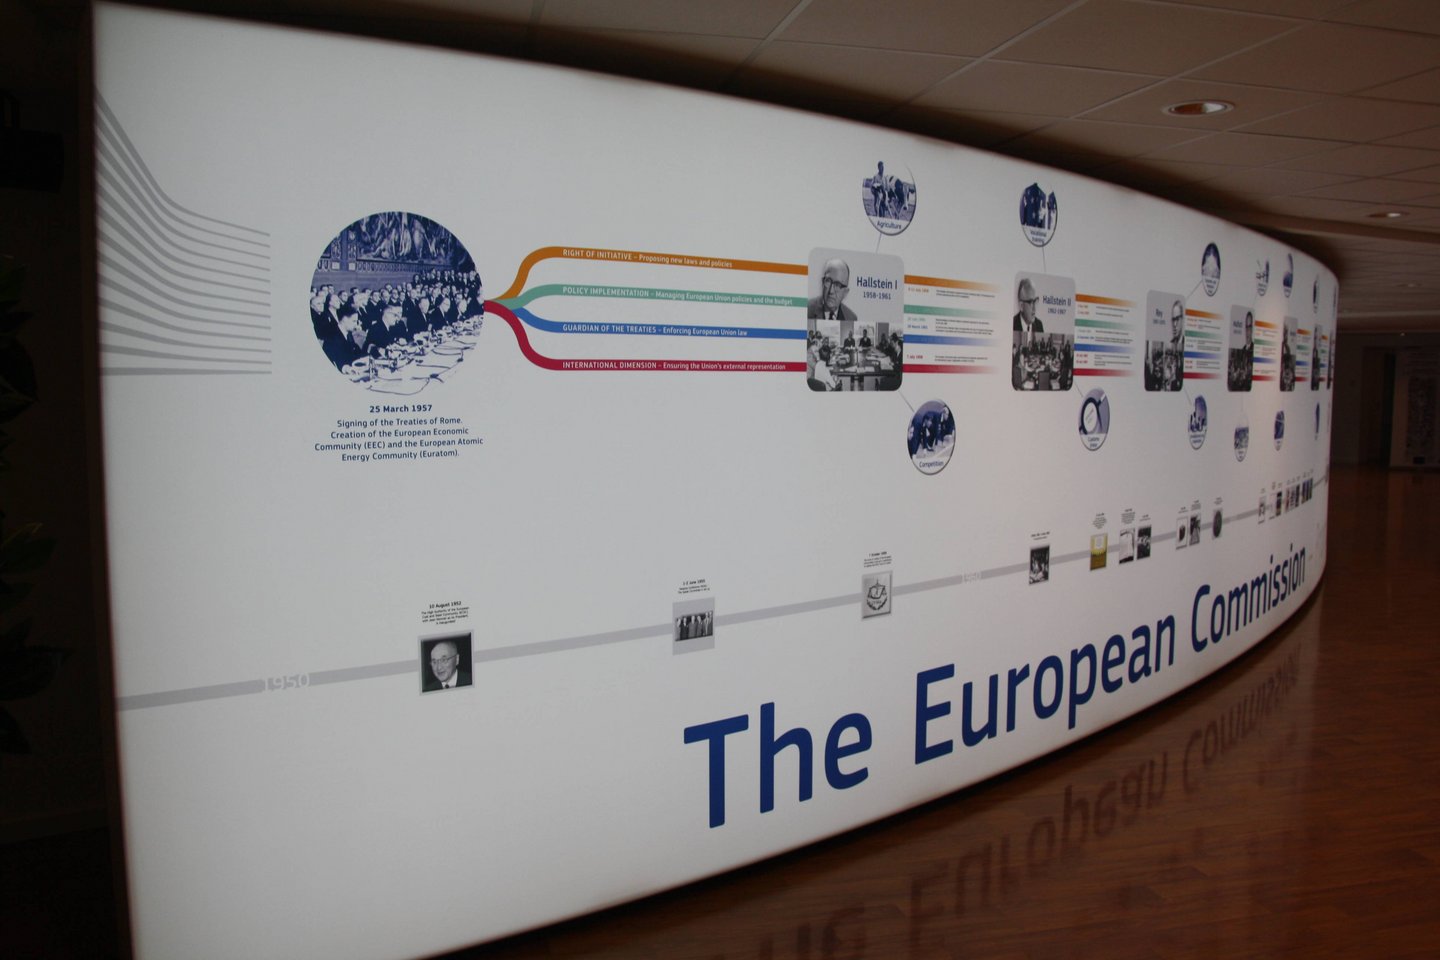 Information board with a timeline of the European Commision